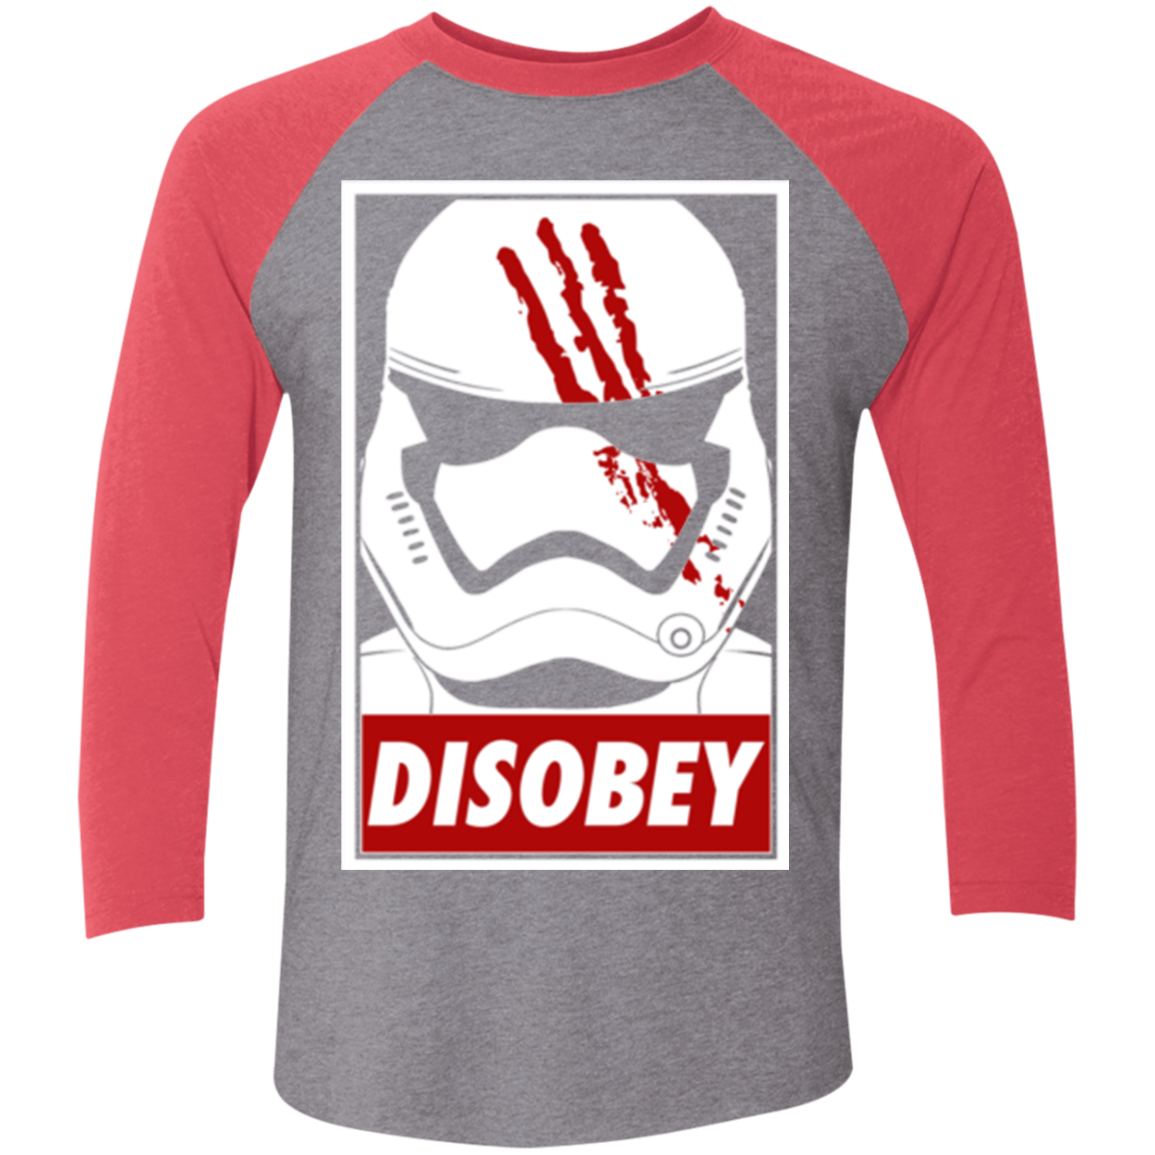 Disobey Men's Triblend 3/4 Sleeve